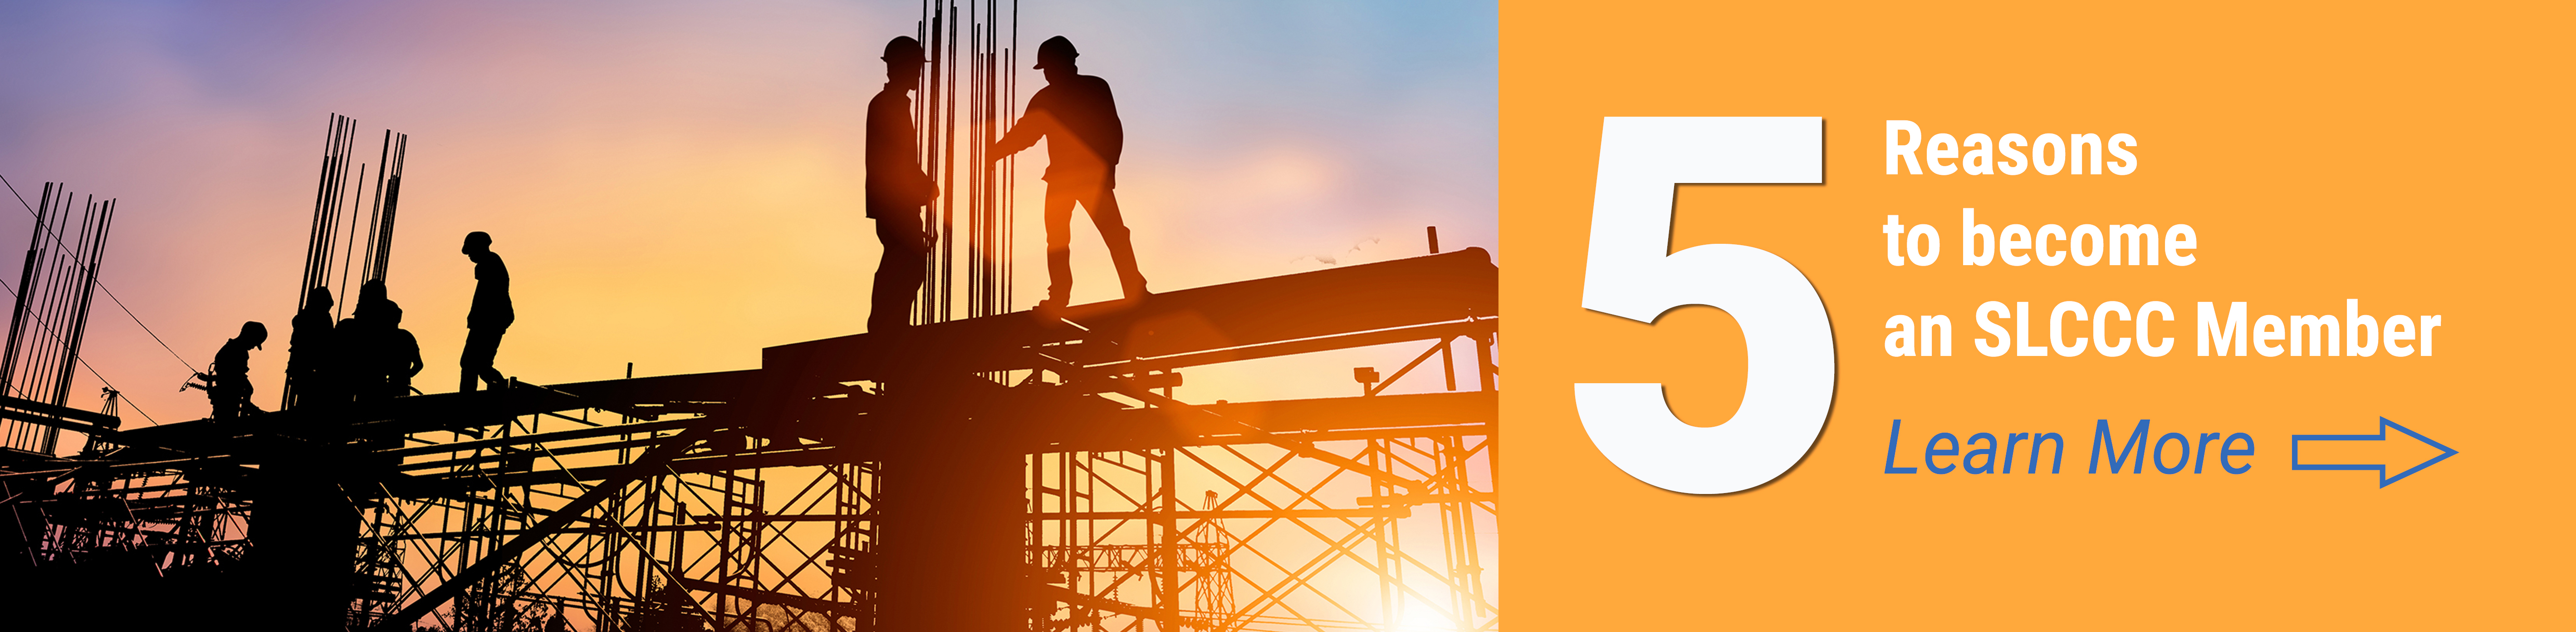 Banner Of Construction Workers. Five Reasons To Become An SLCCC Member. Learn More.